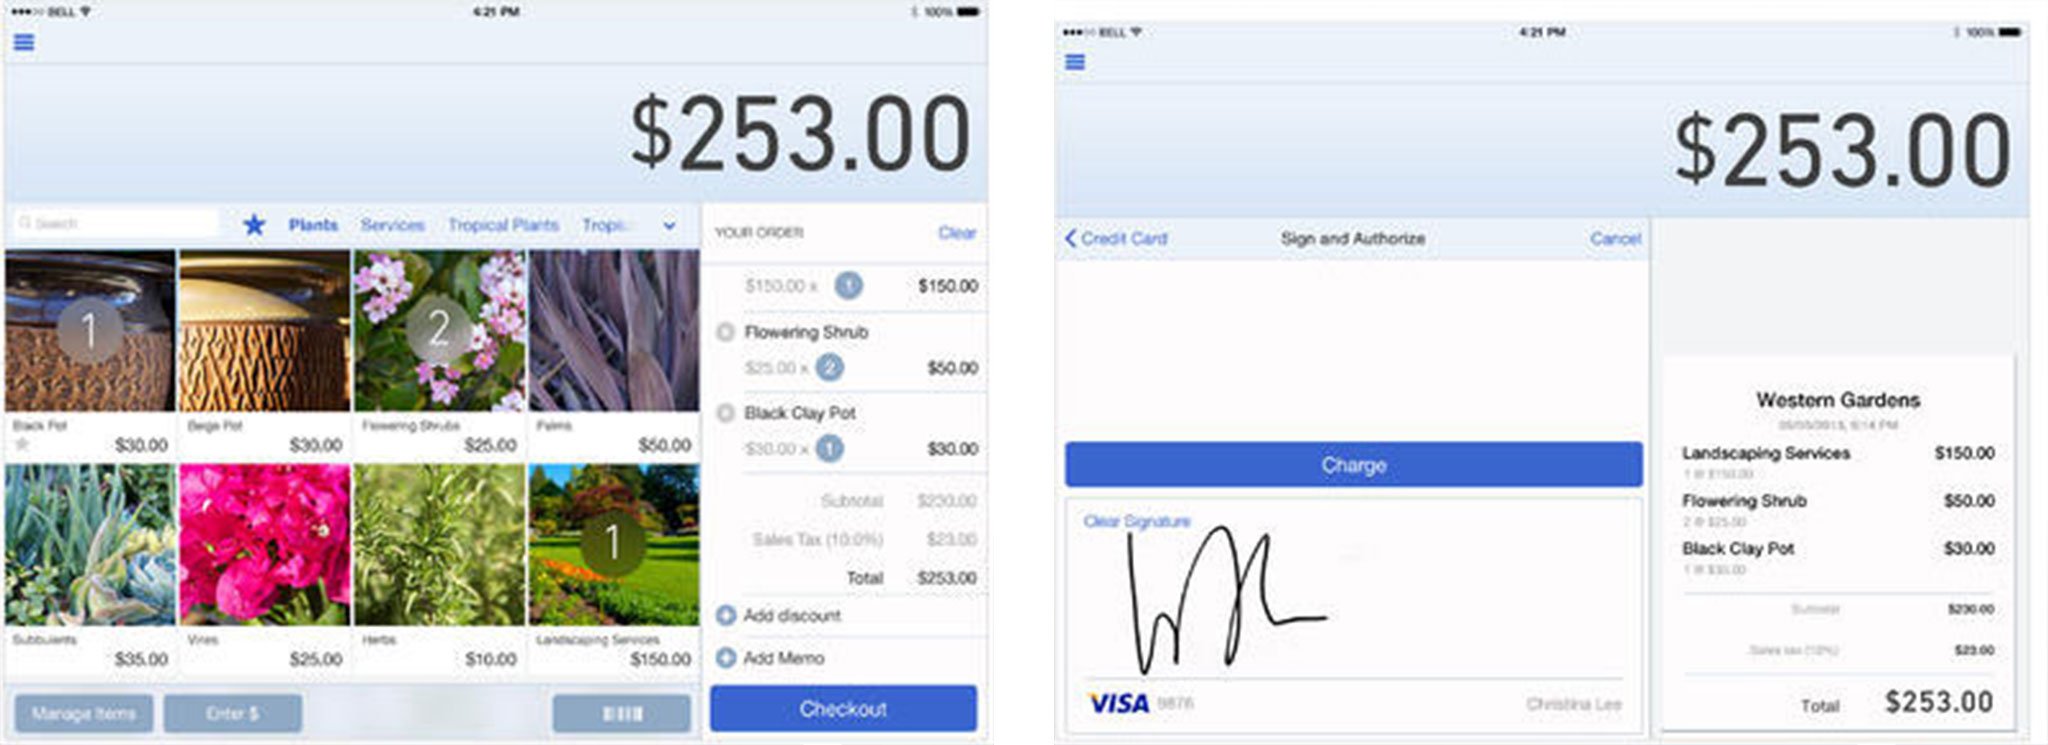 Best point of sale apps for iPhone and iPad: GoPayment